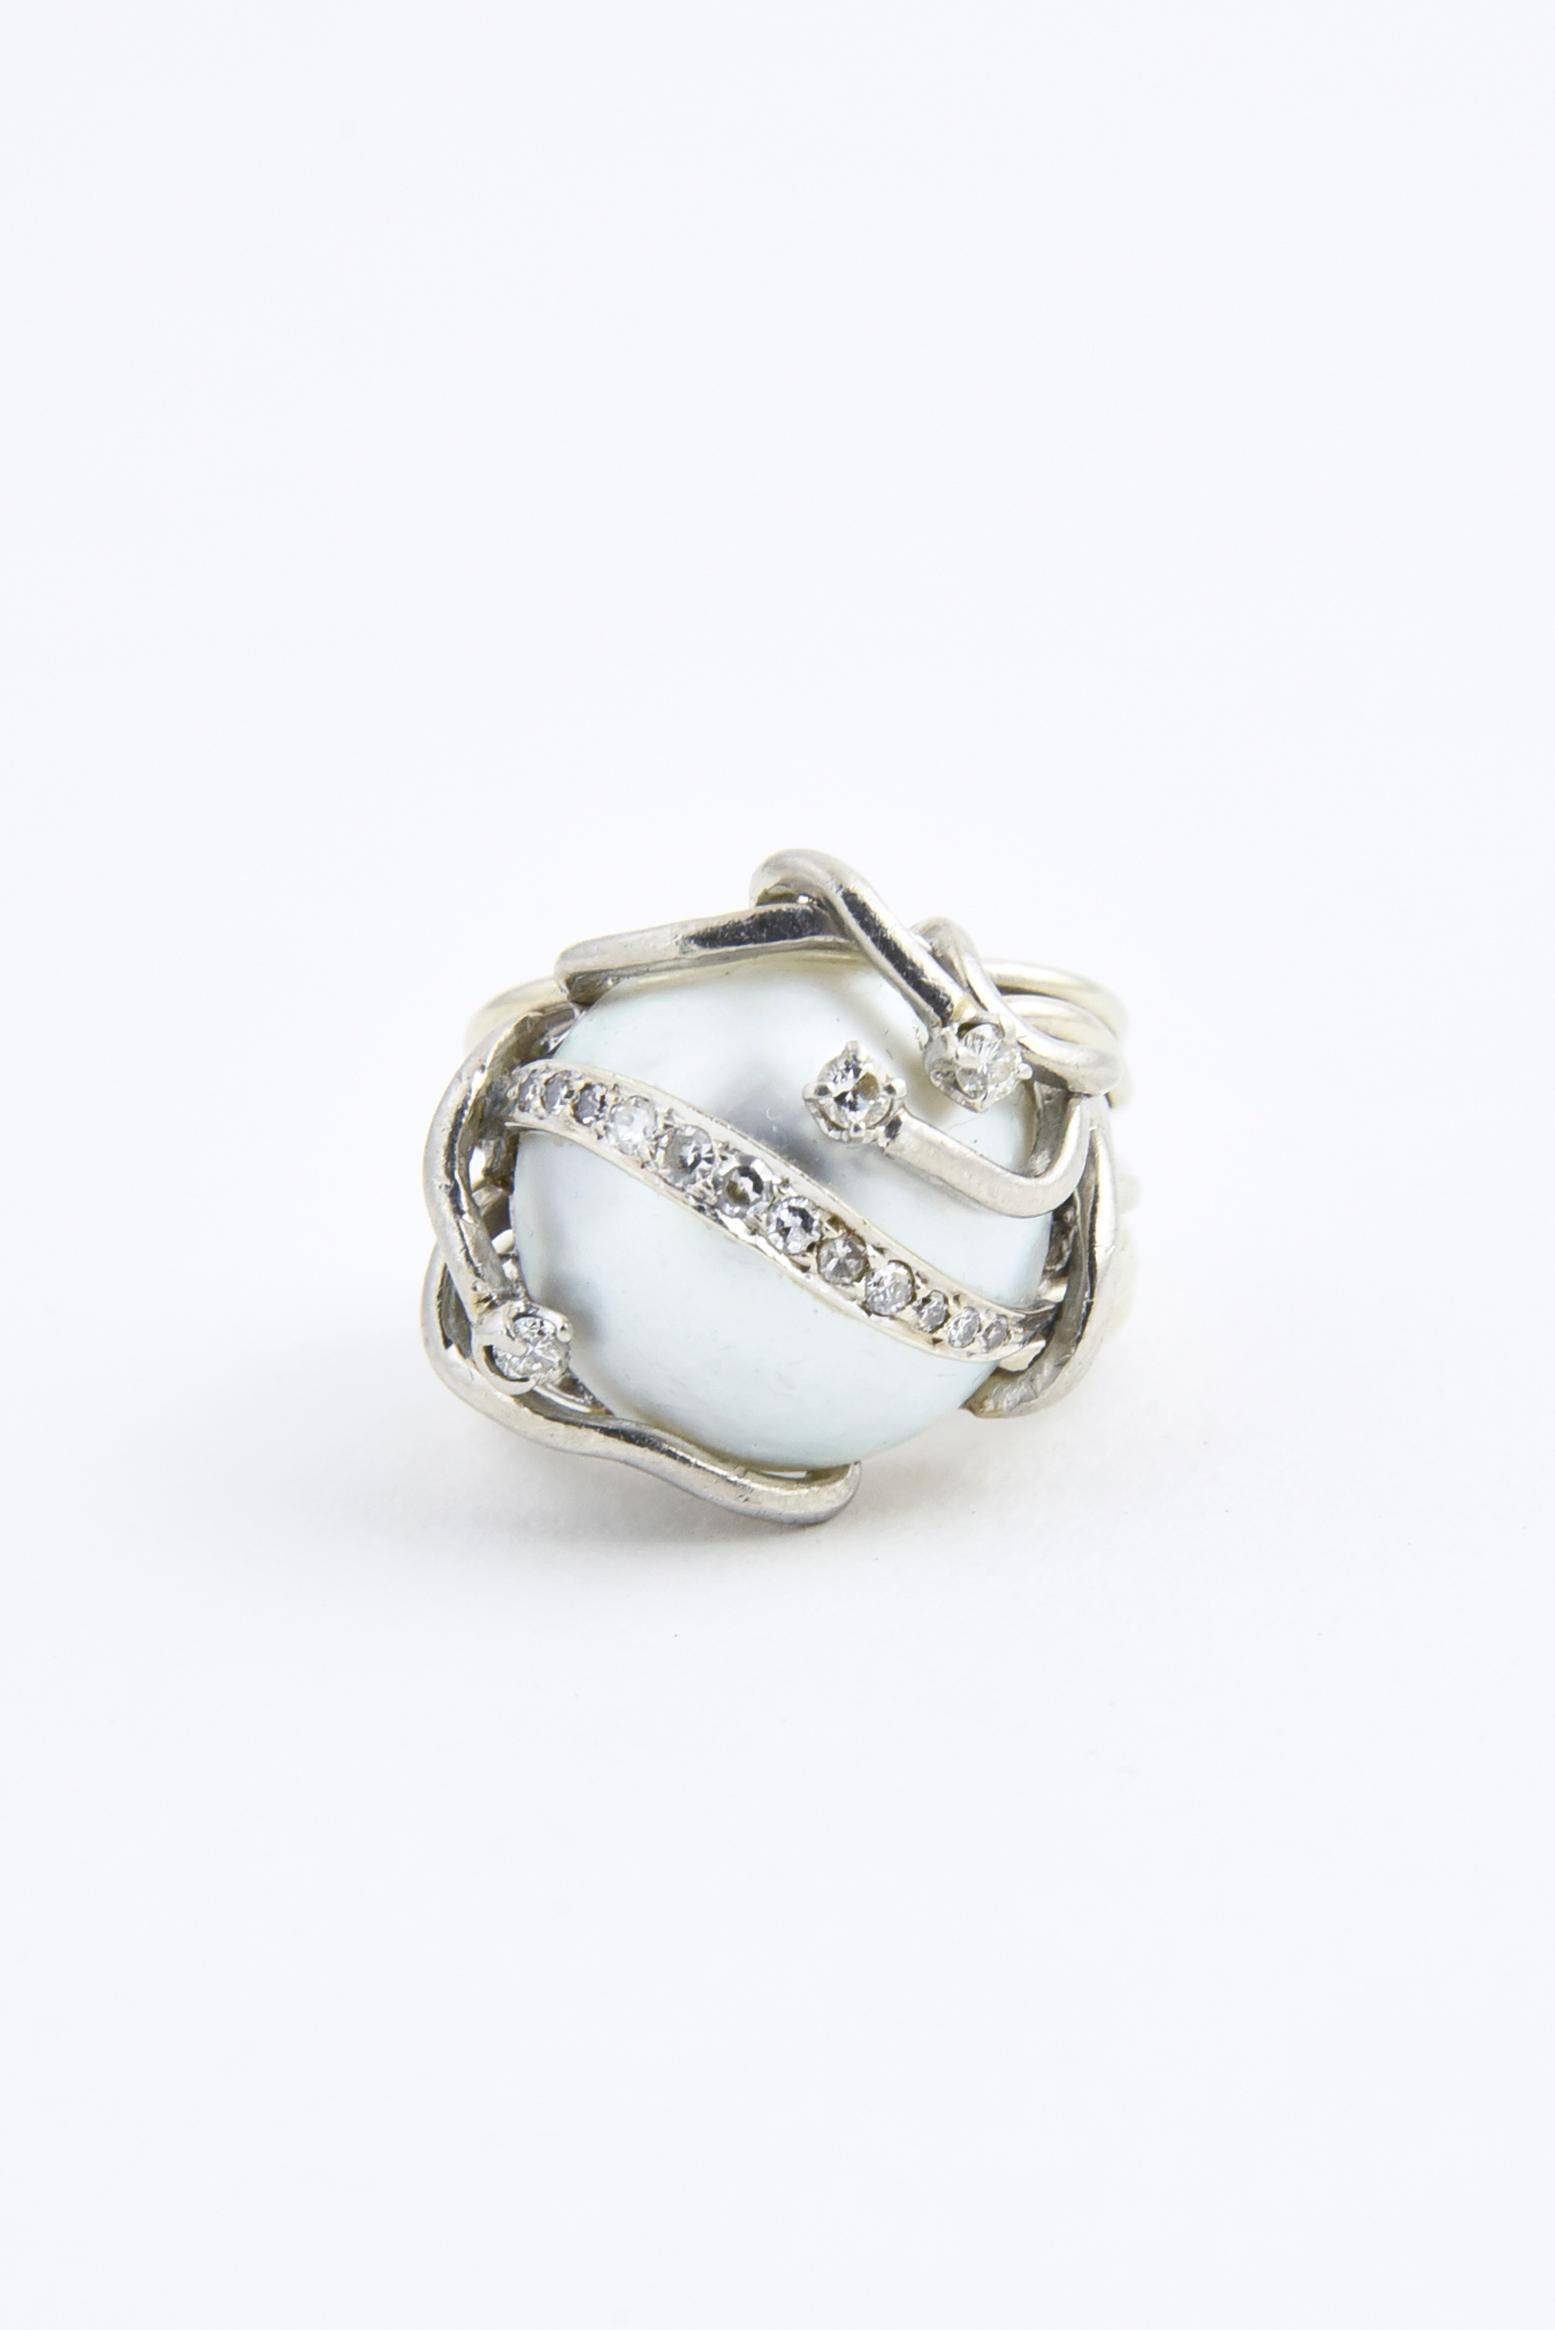 1960s freeform ring featuring a mabe blister pearl mounted in a 14K white gold wire design with diamonds. Marked: 14K. US size: 6 - 6.25.

This ring can not be sized.